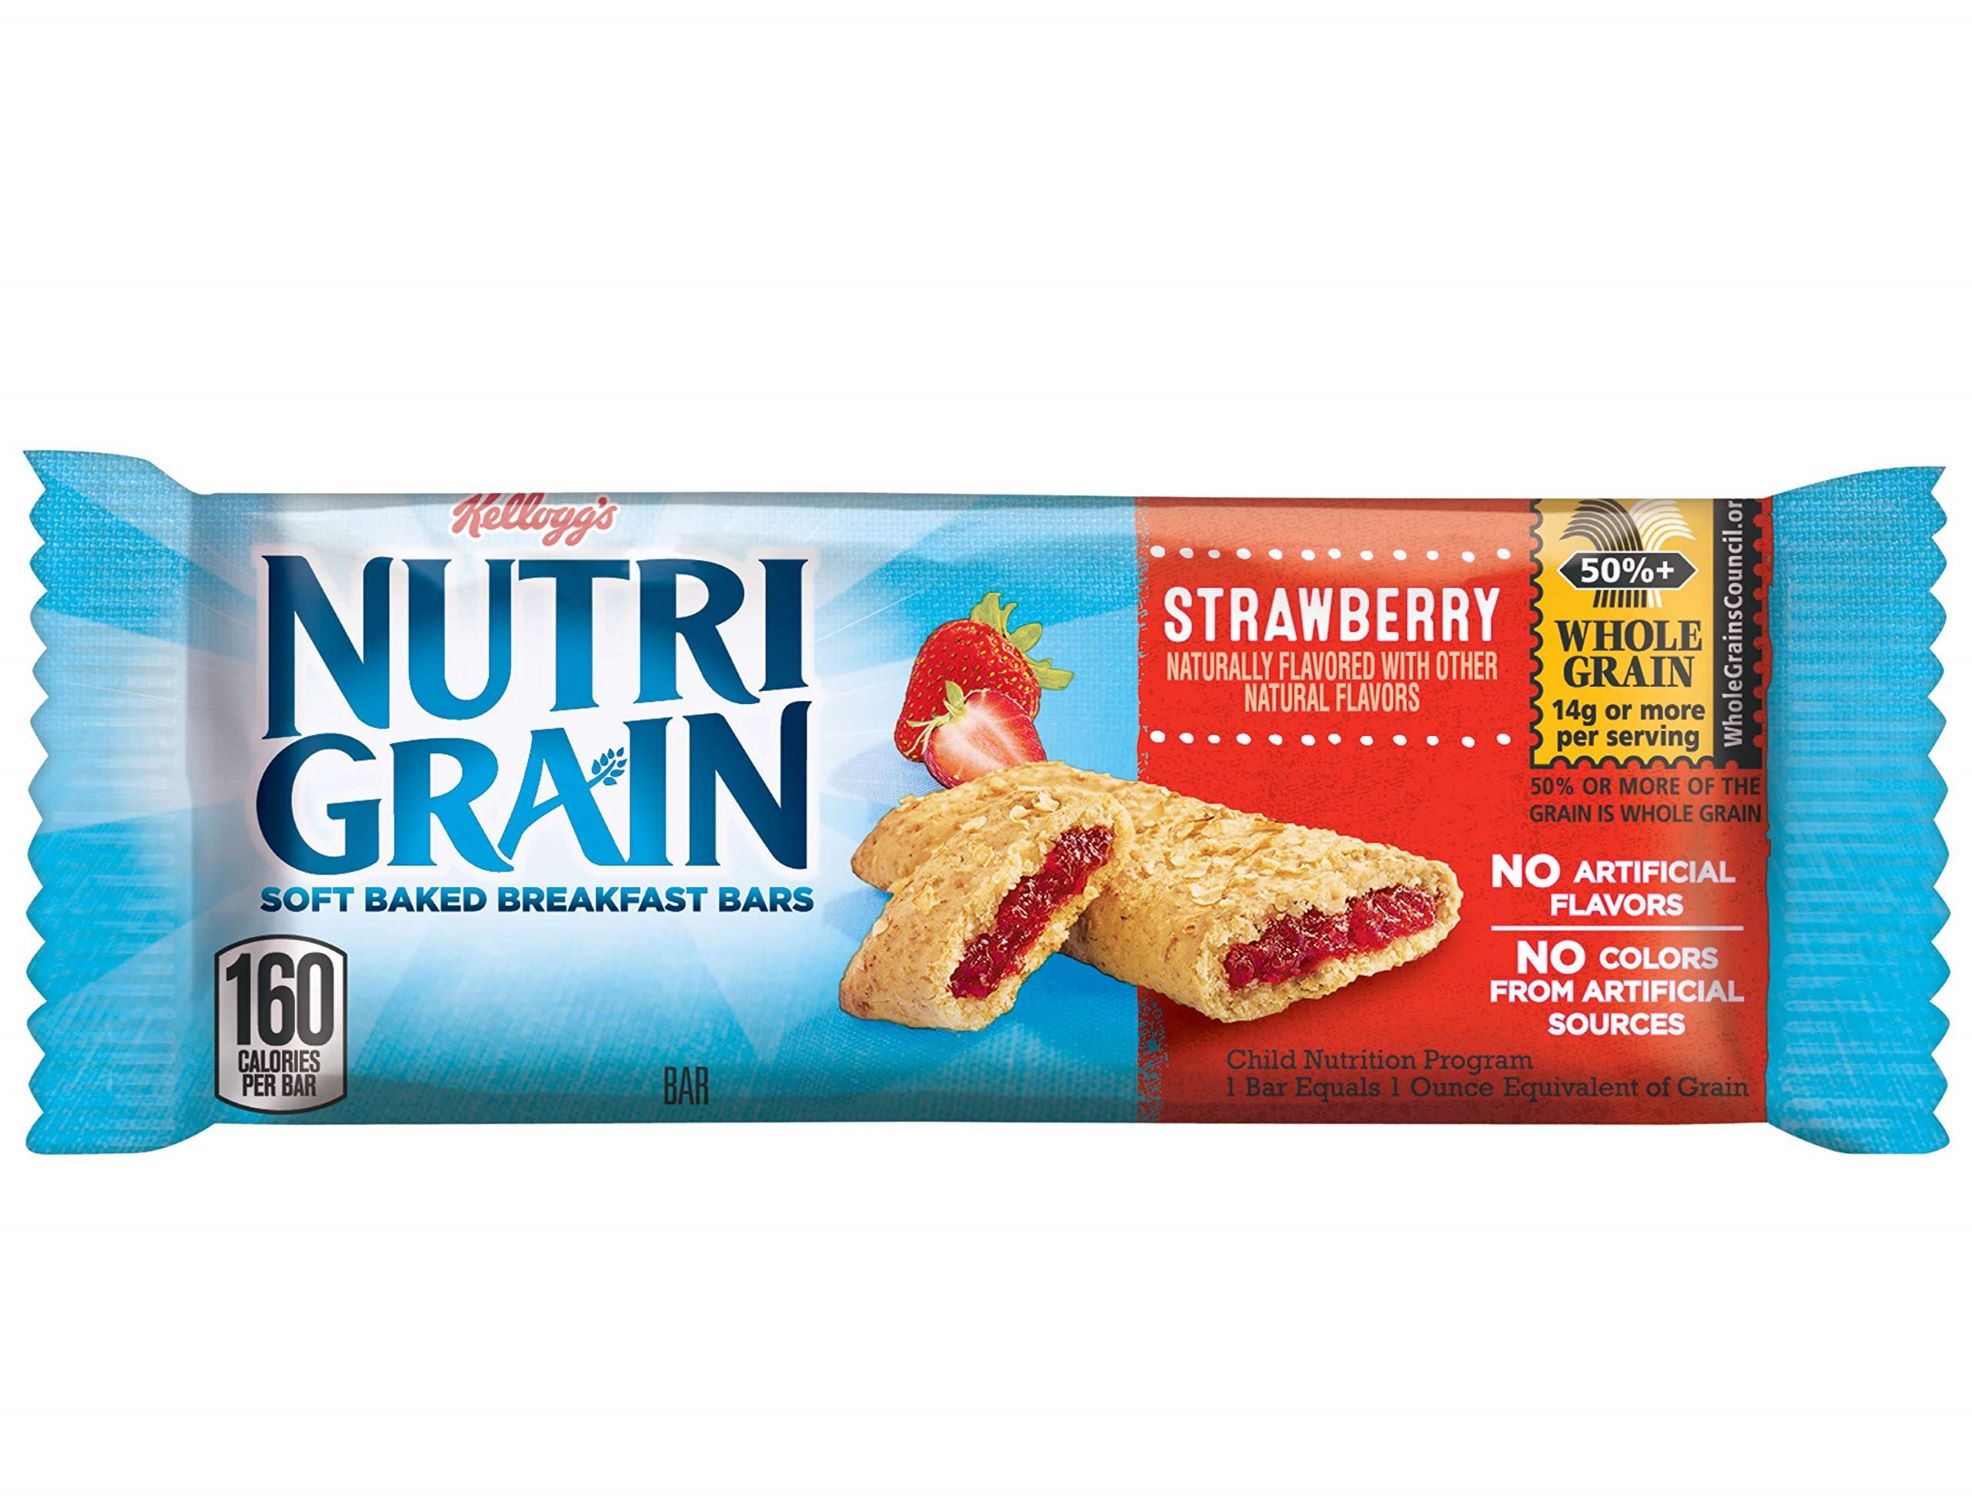 15-strawberry-nutrigrain-bar-nutrition-facts